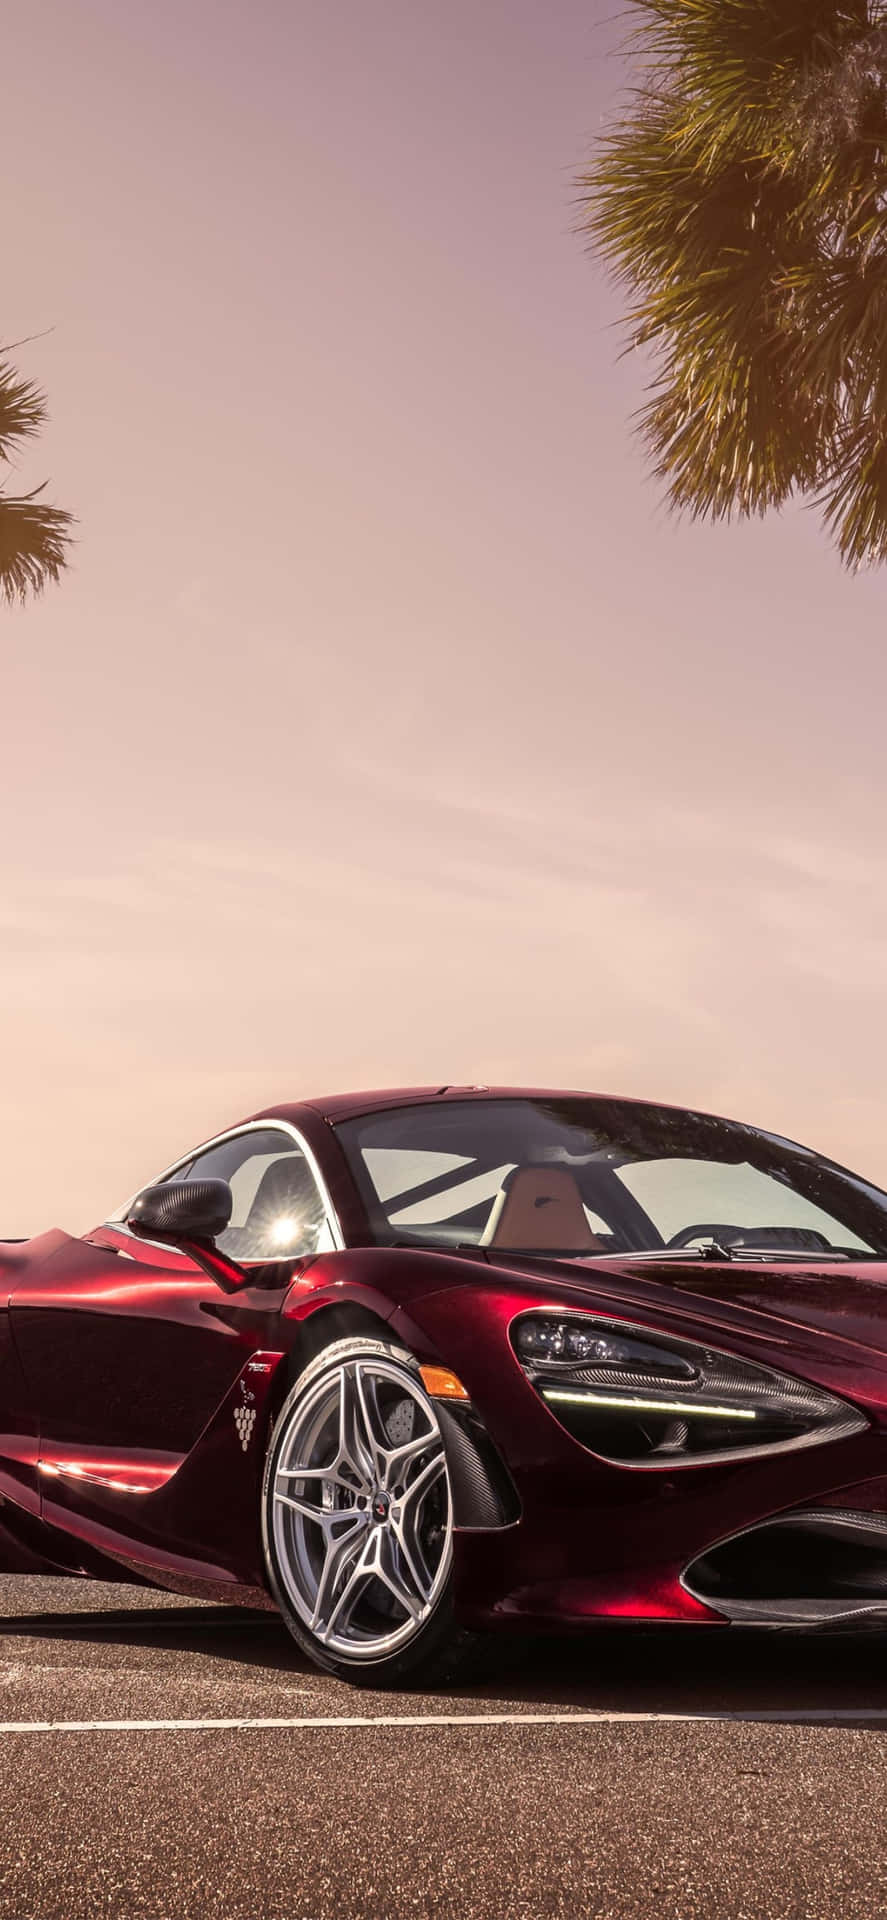 The Iphone Xs and Mclaren 720s: A Symbol of Luxury